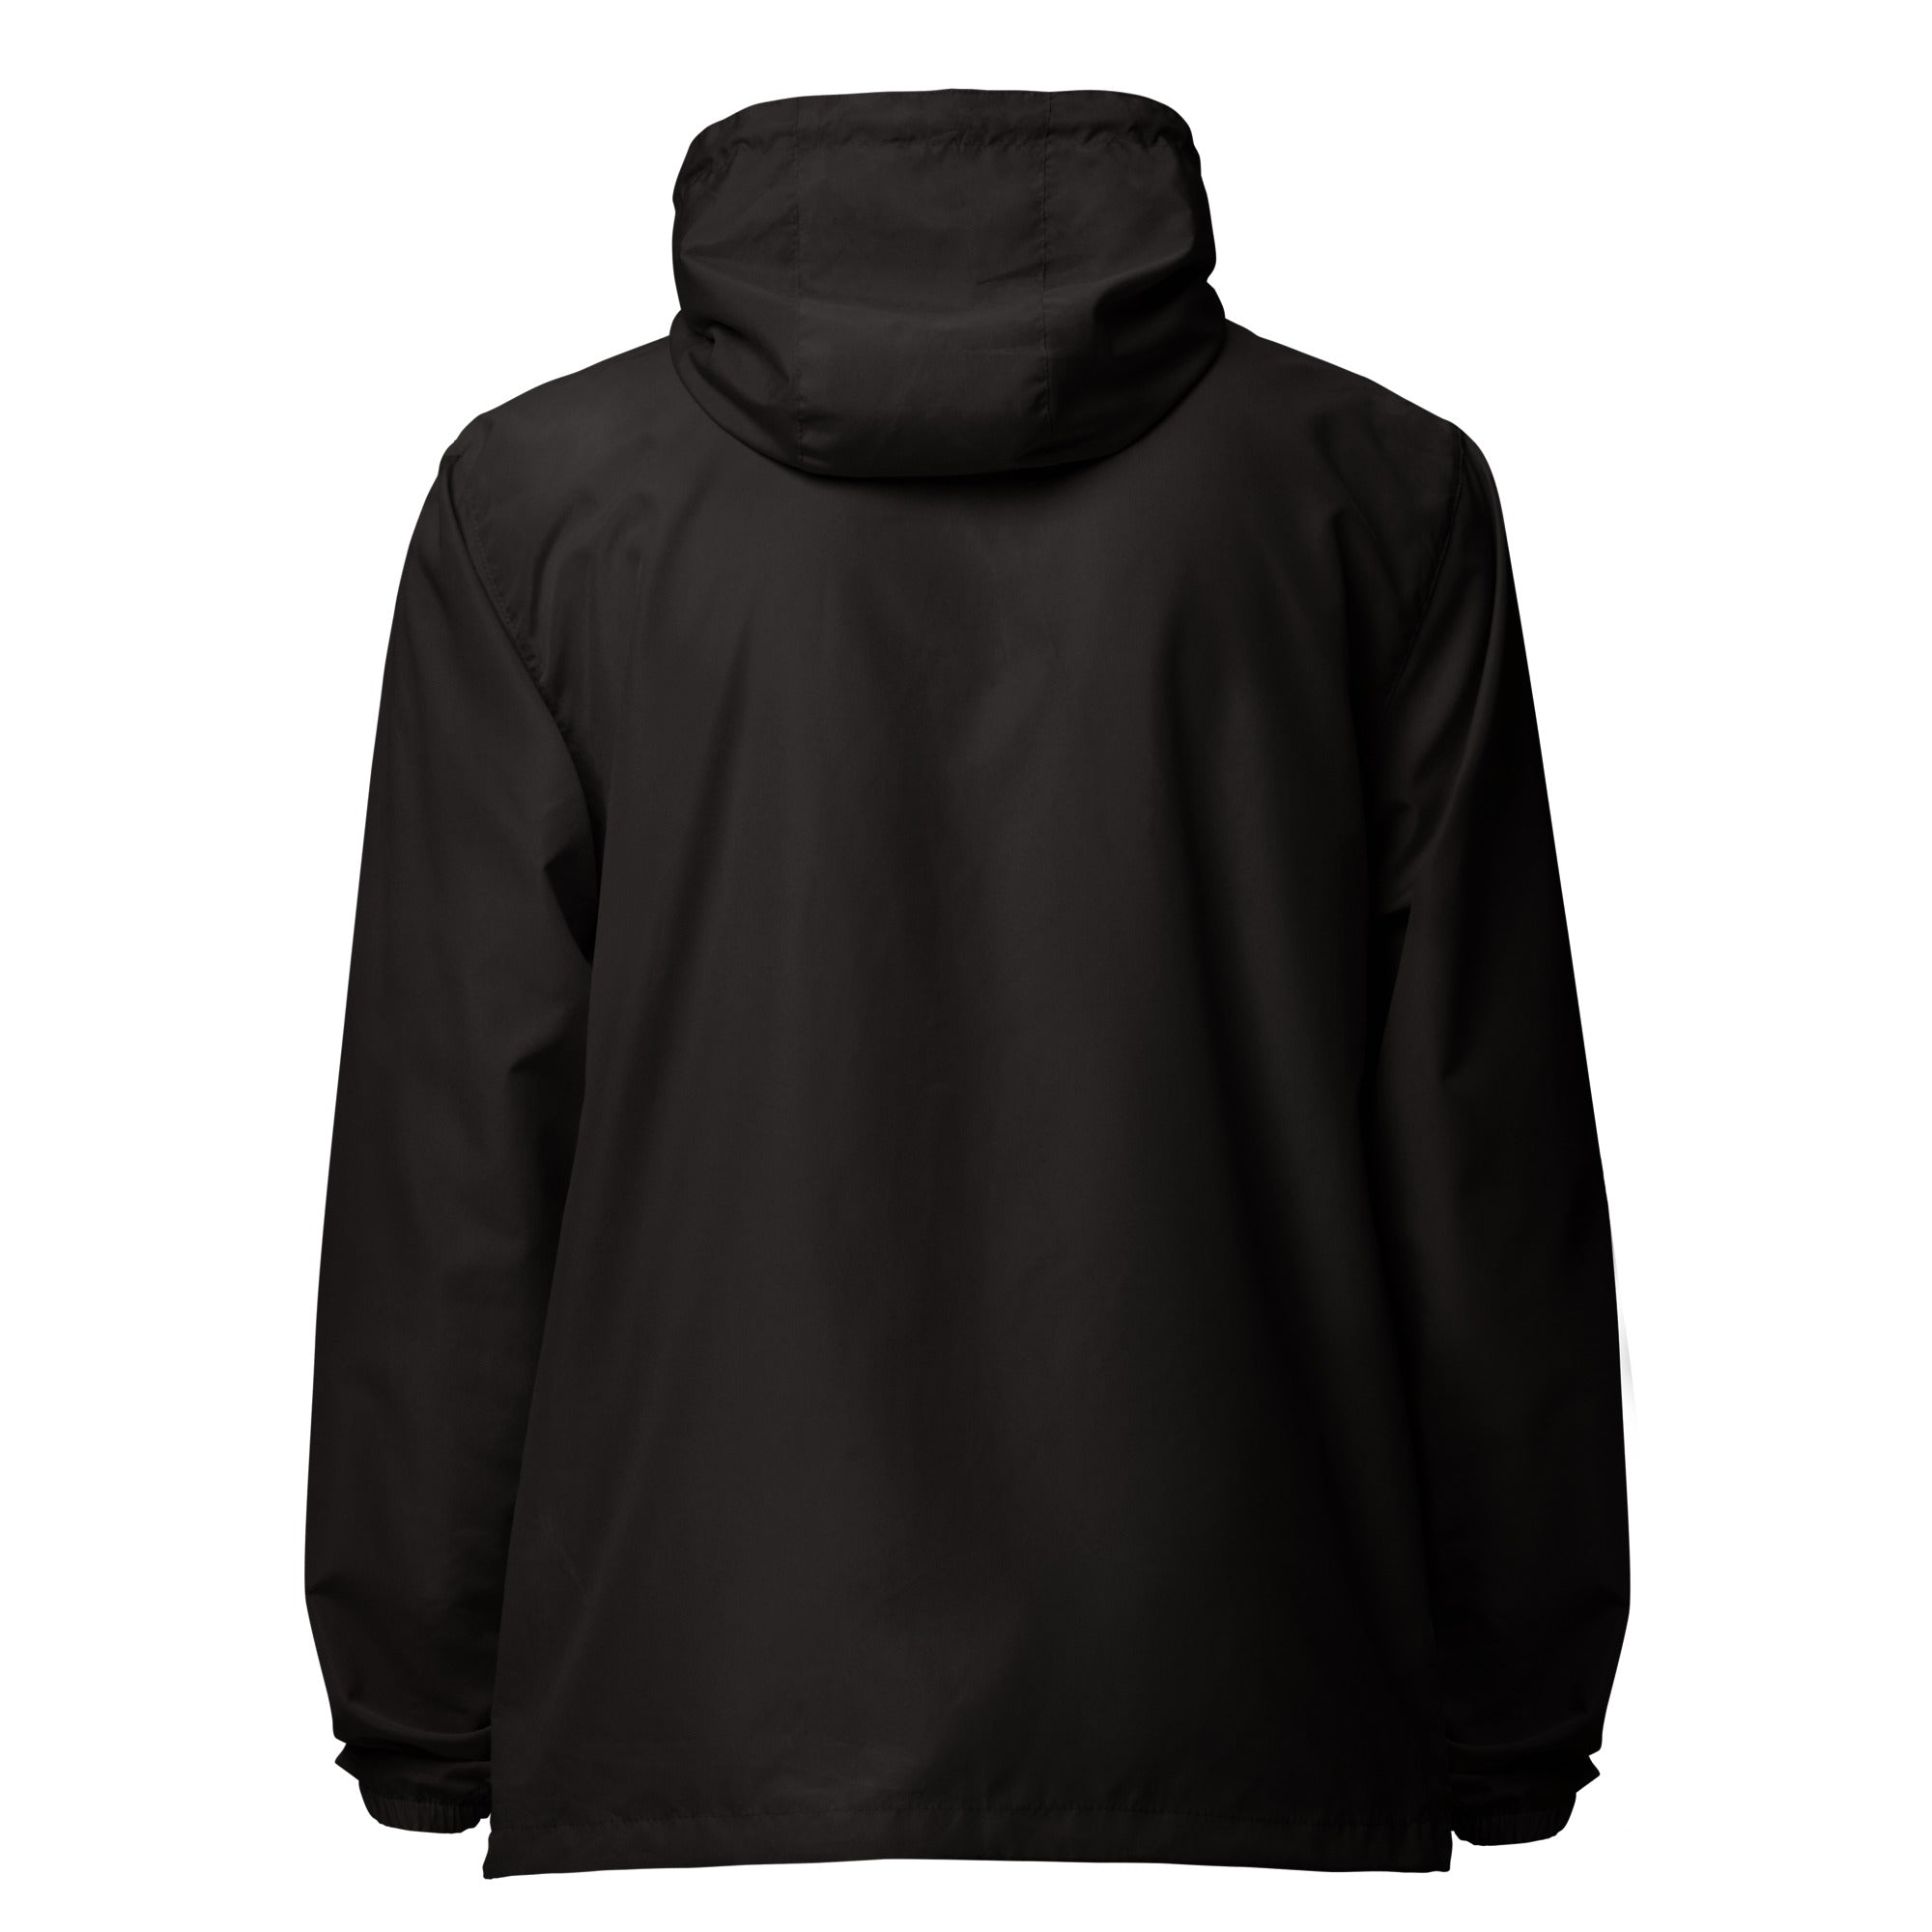 PersonalHour - Unisex lightweight zip up windbreaker - Yoga Top - Personal Hour for Yoga and Meditations 